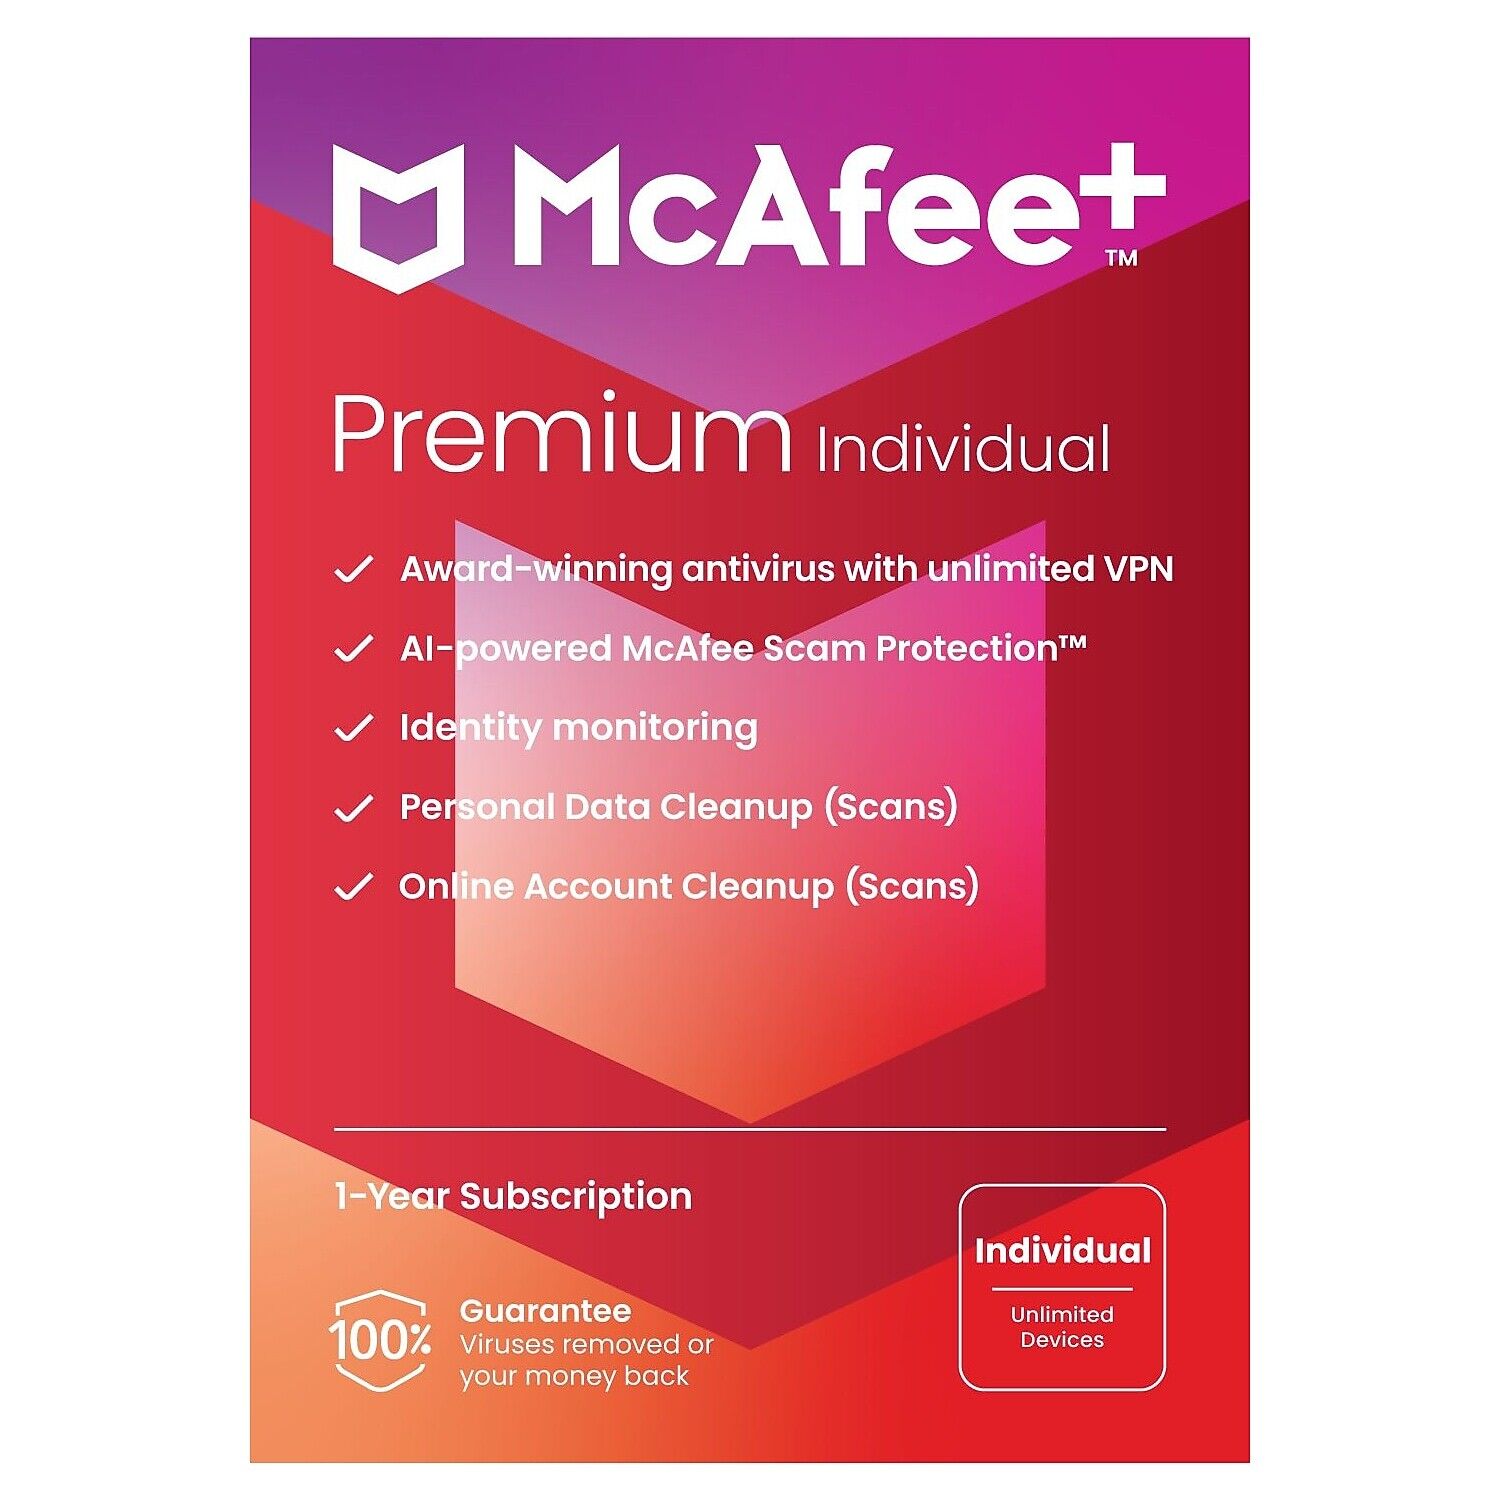 McAfee+ Premium Individual for Unlimited Users Windows/Mac/Android/iOS/ChromeOS